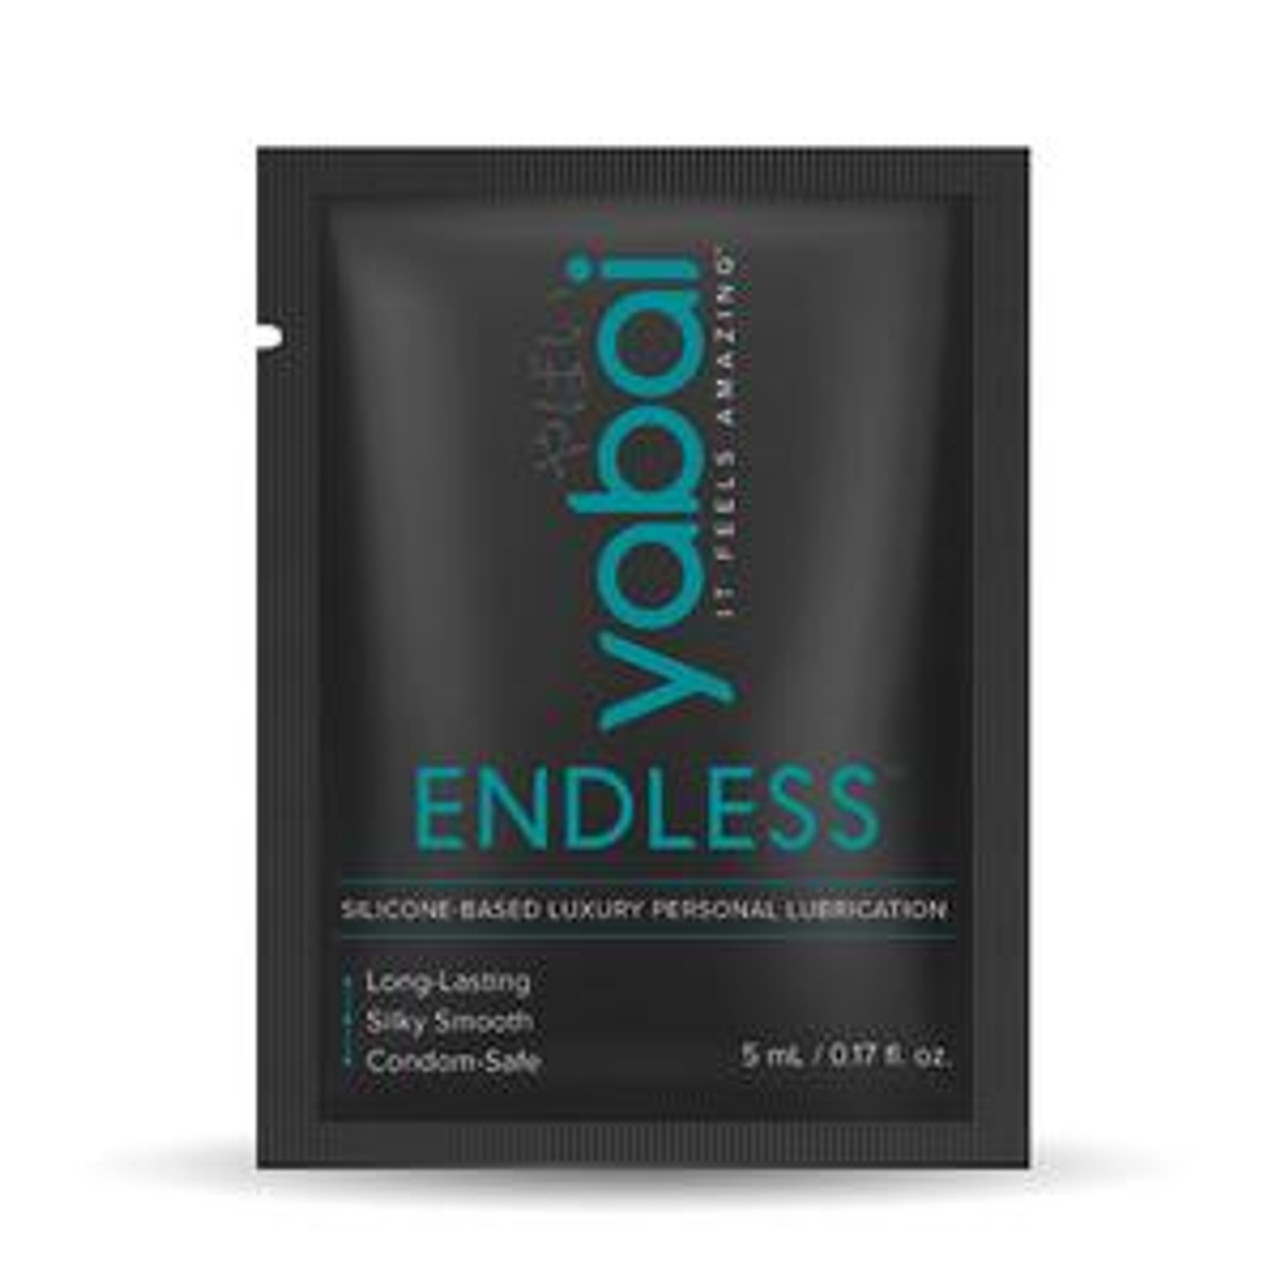 Buy Yabai Endless Silicone Based Personal Lubricant Individual Use Foil Pack Online | CondomsFast